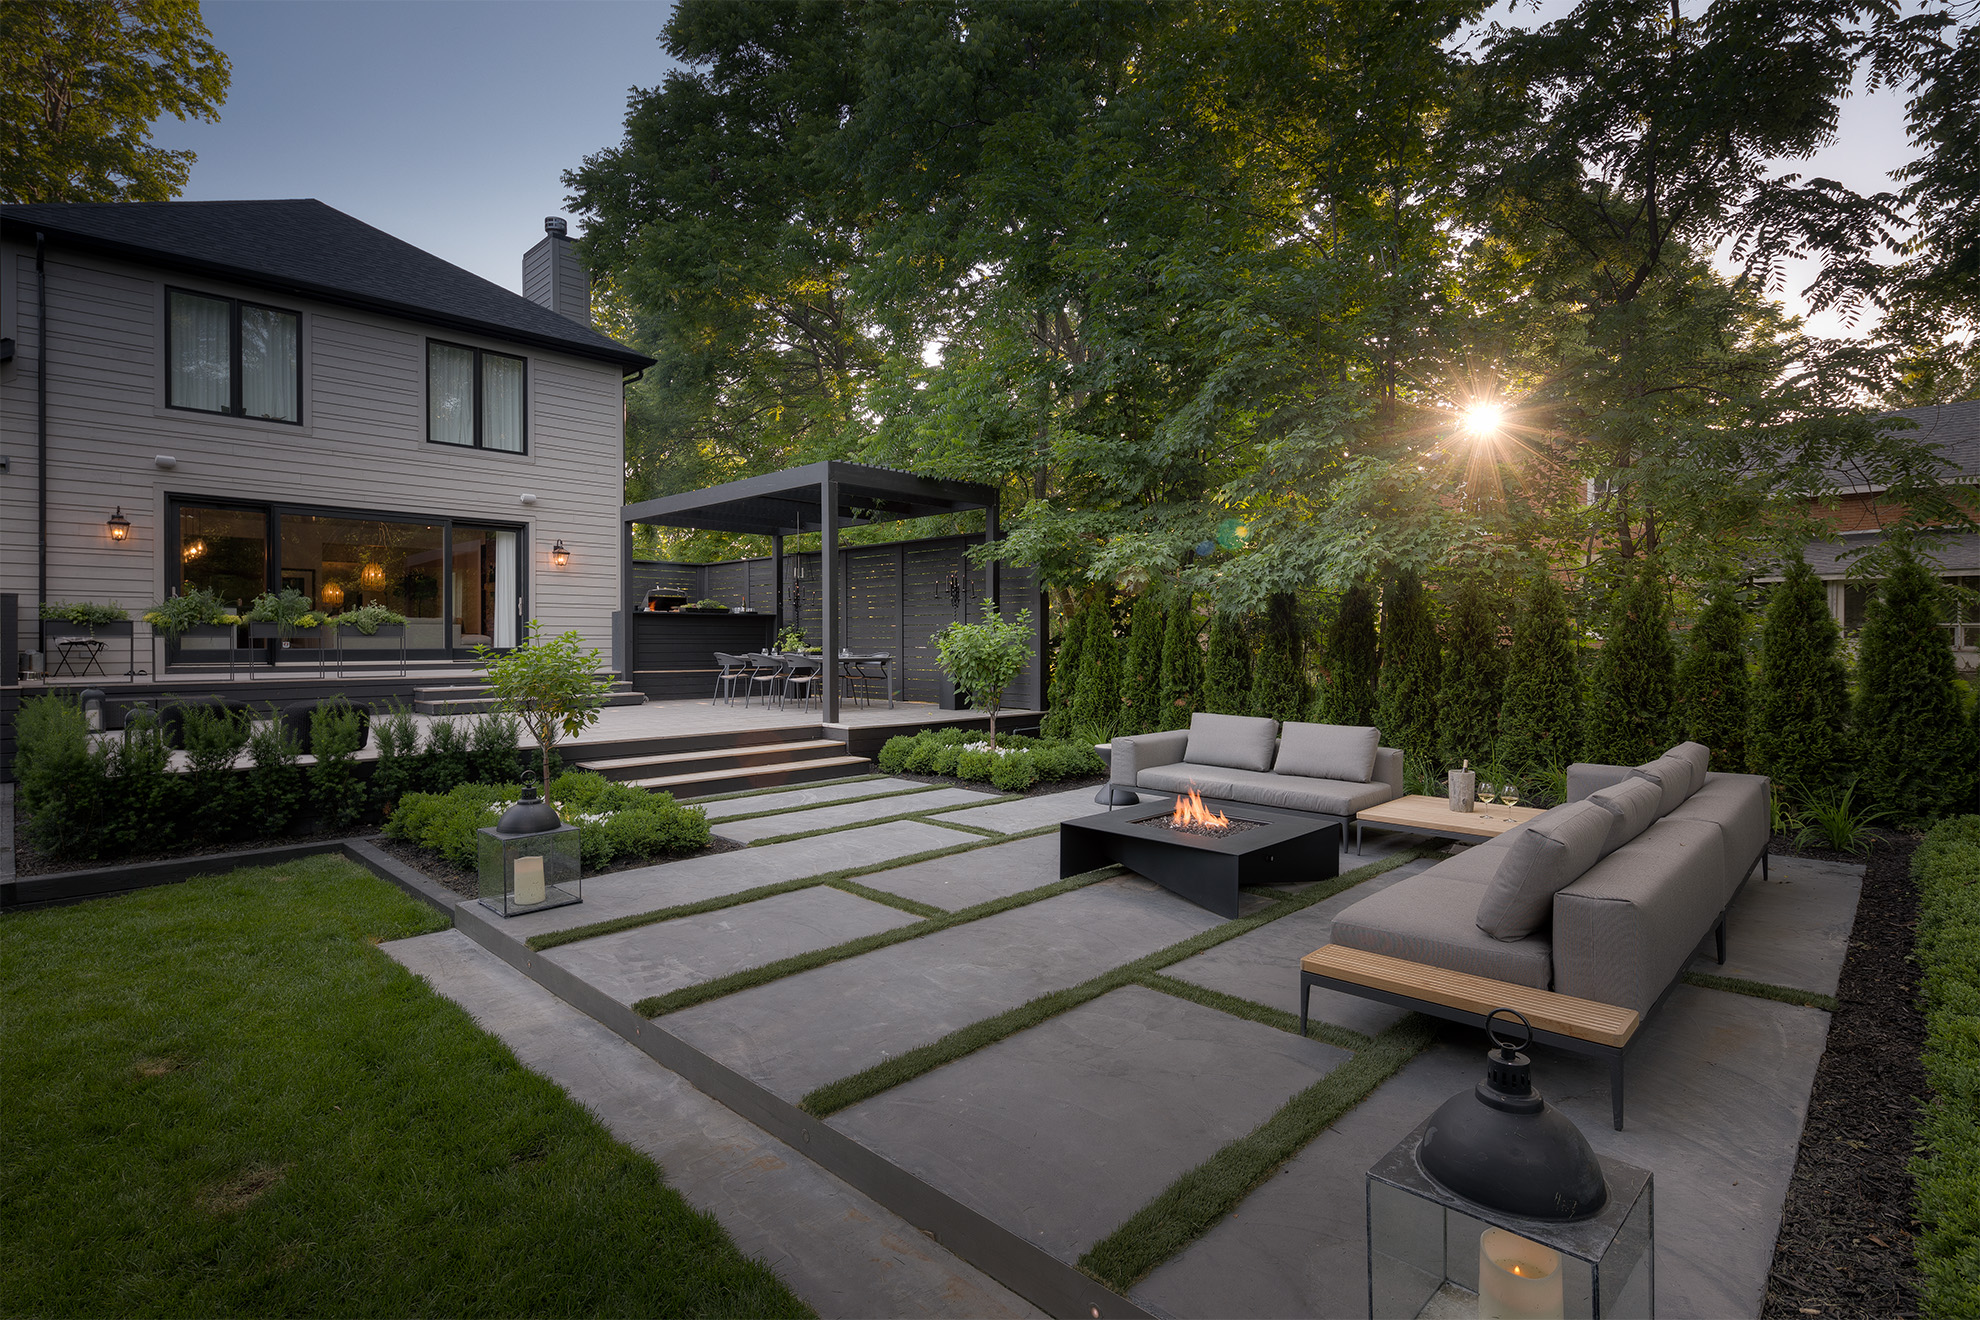 Contemporary home with a fire pit in the outdoor living area.